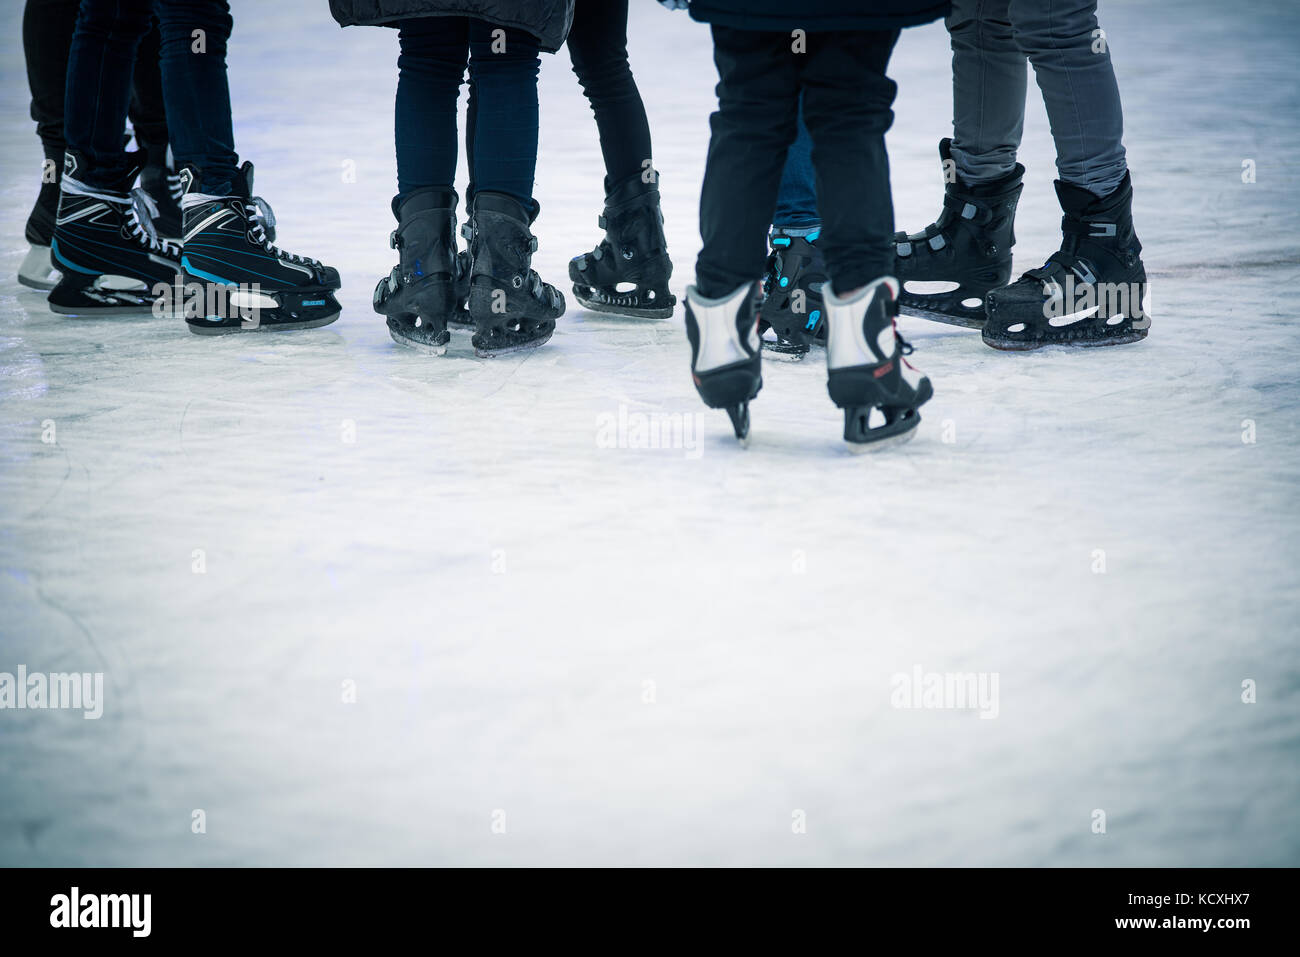 Seven young people standing on ice Stock Photo